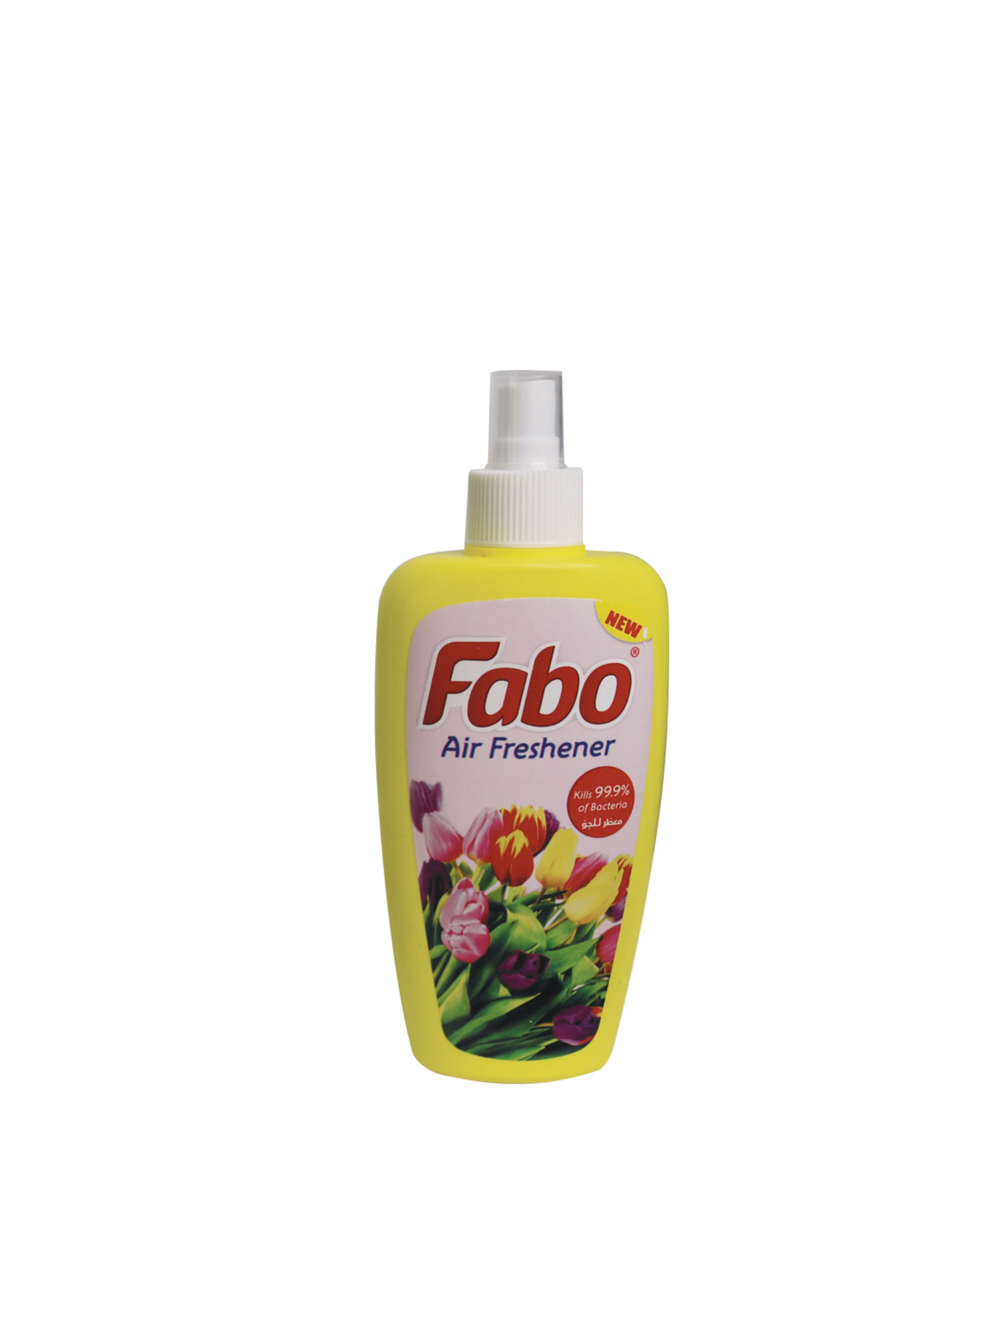 fabo-products_page-0037